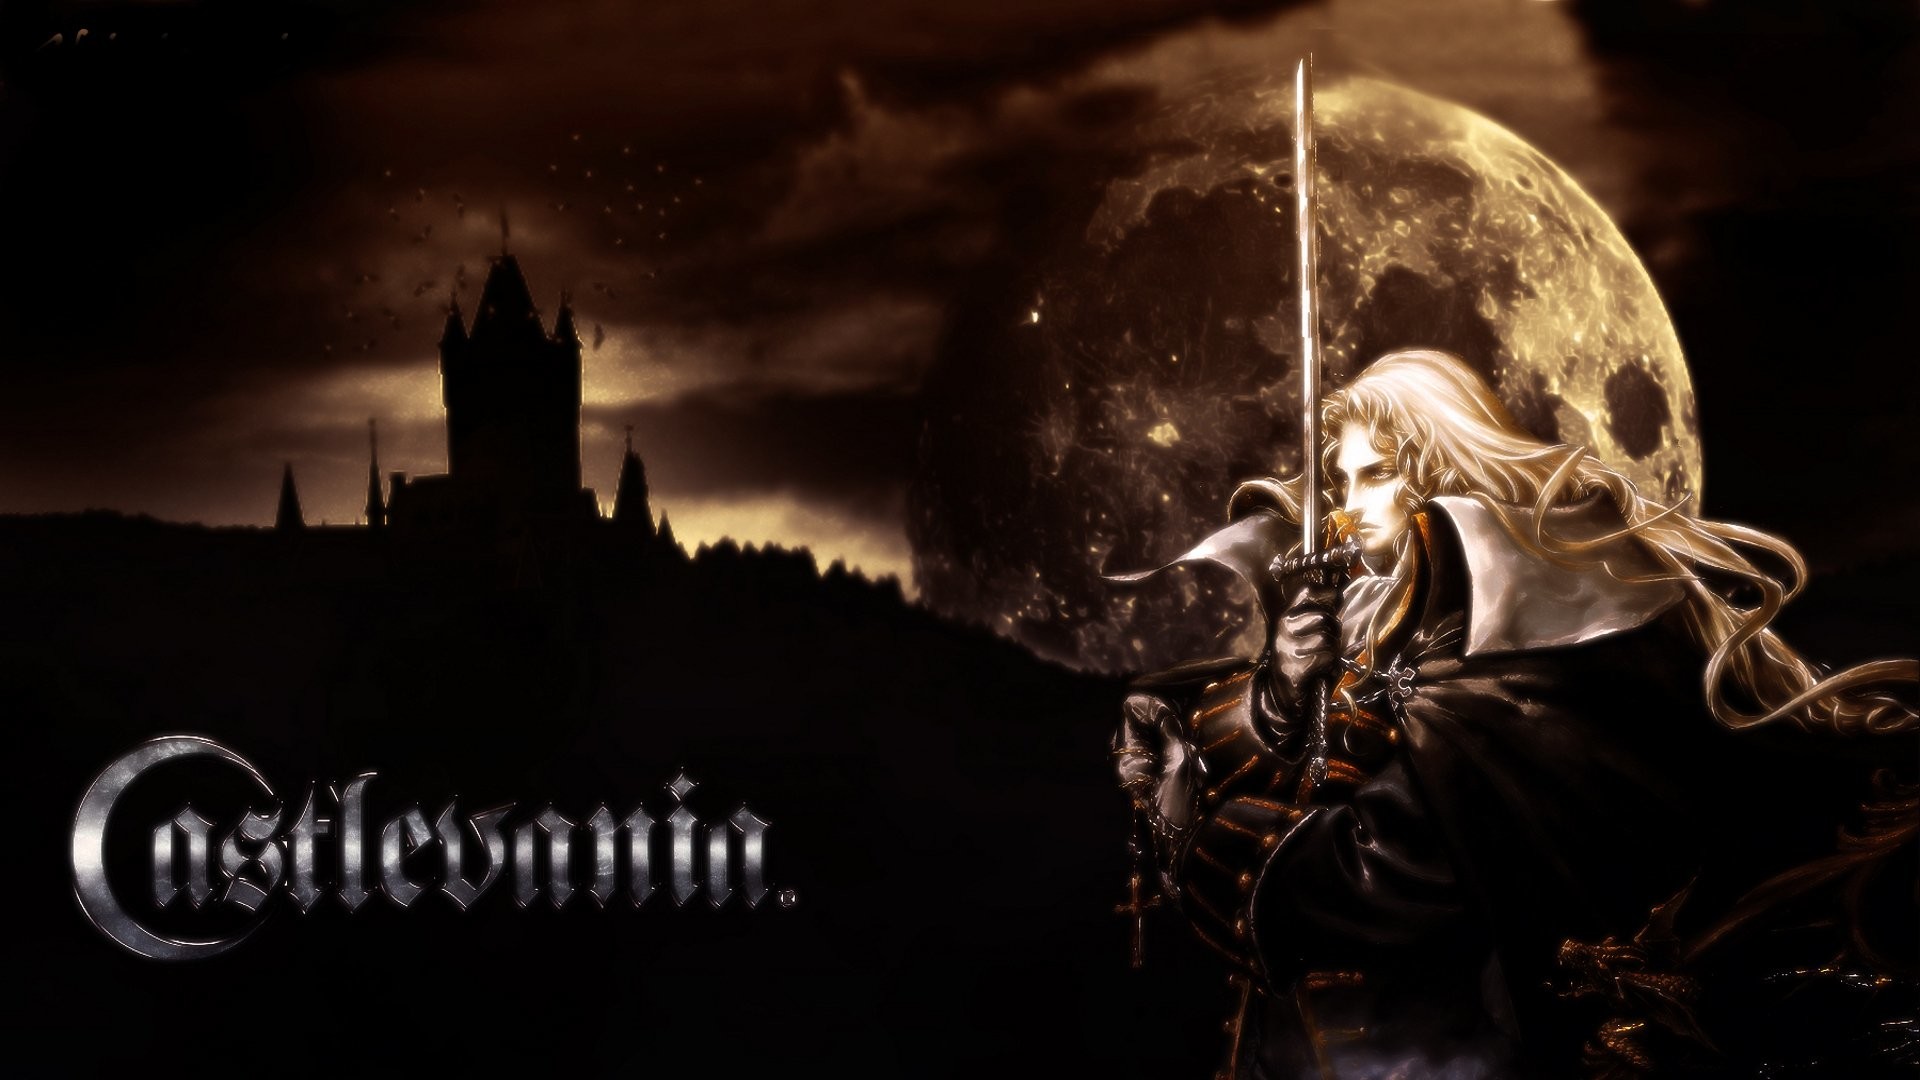 1920x1080 Video Game - Castlevania: Symphony Of The Night Wallpaper